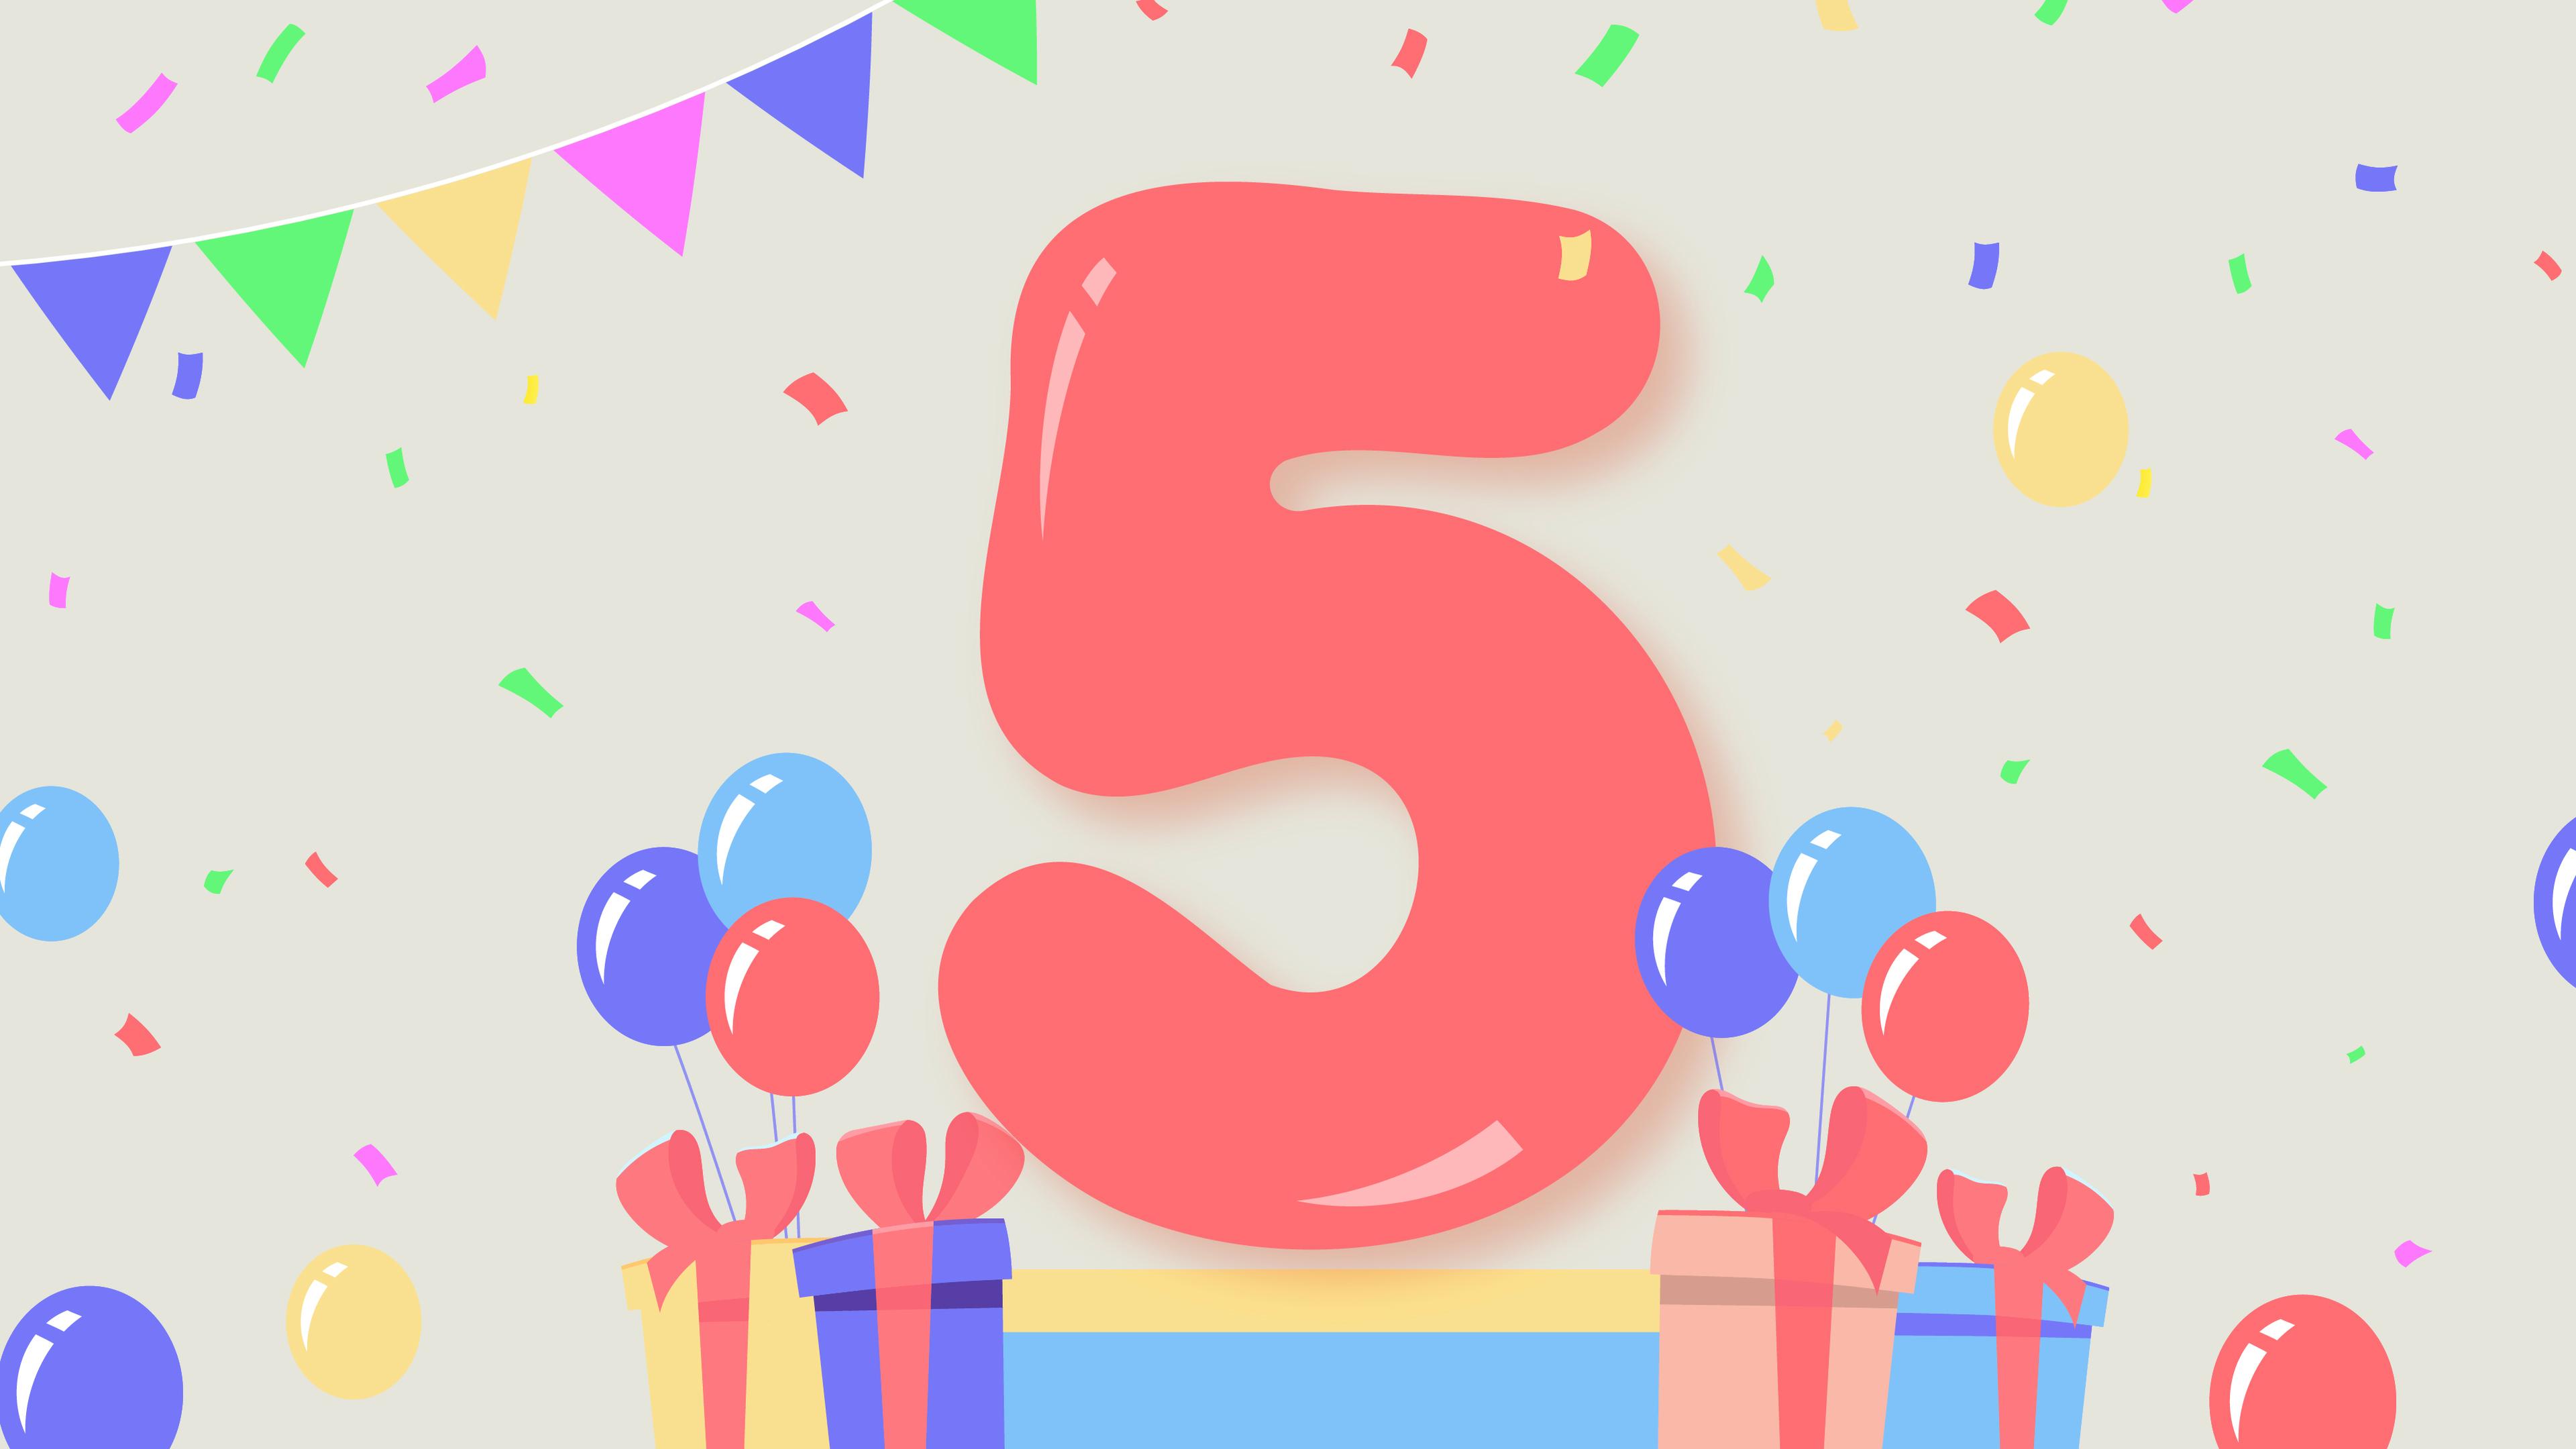 Five years of Finecast